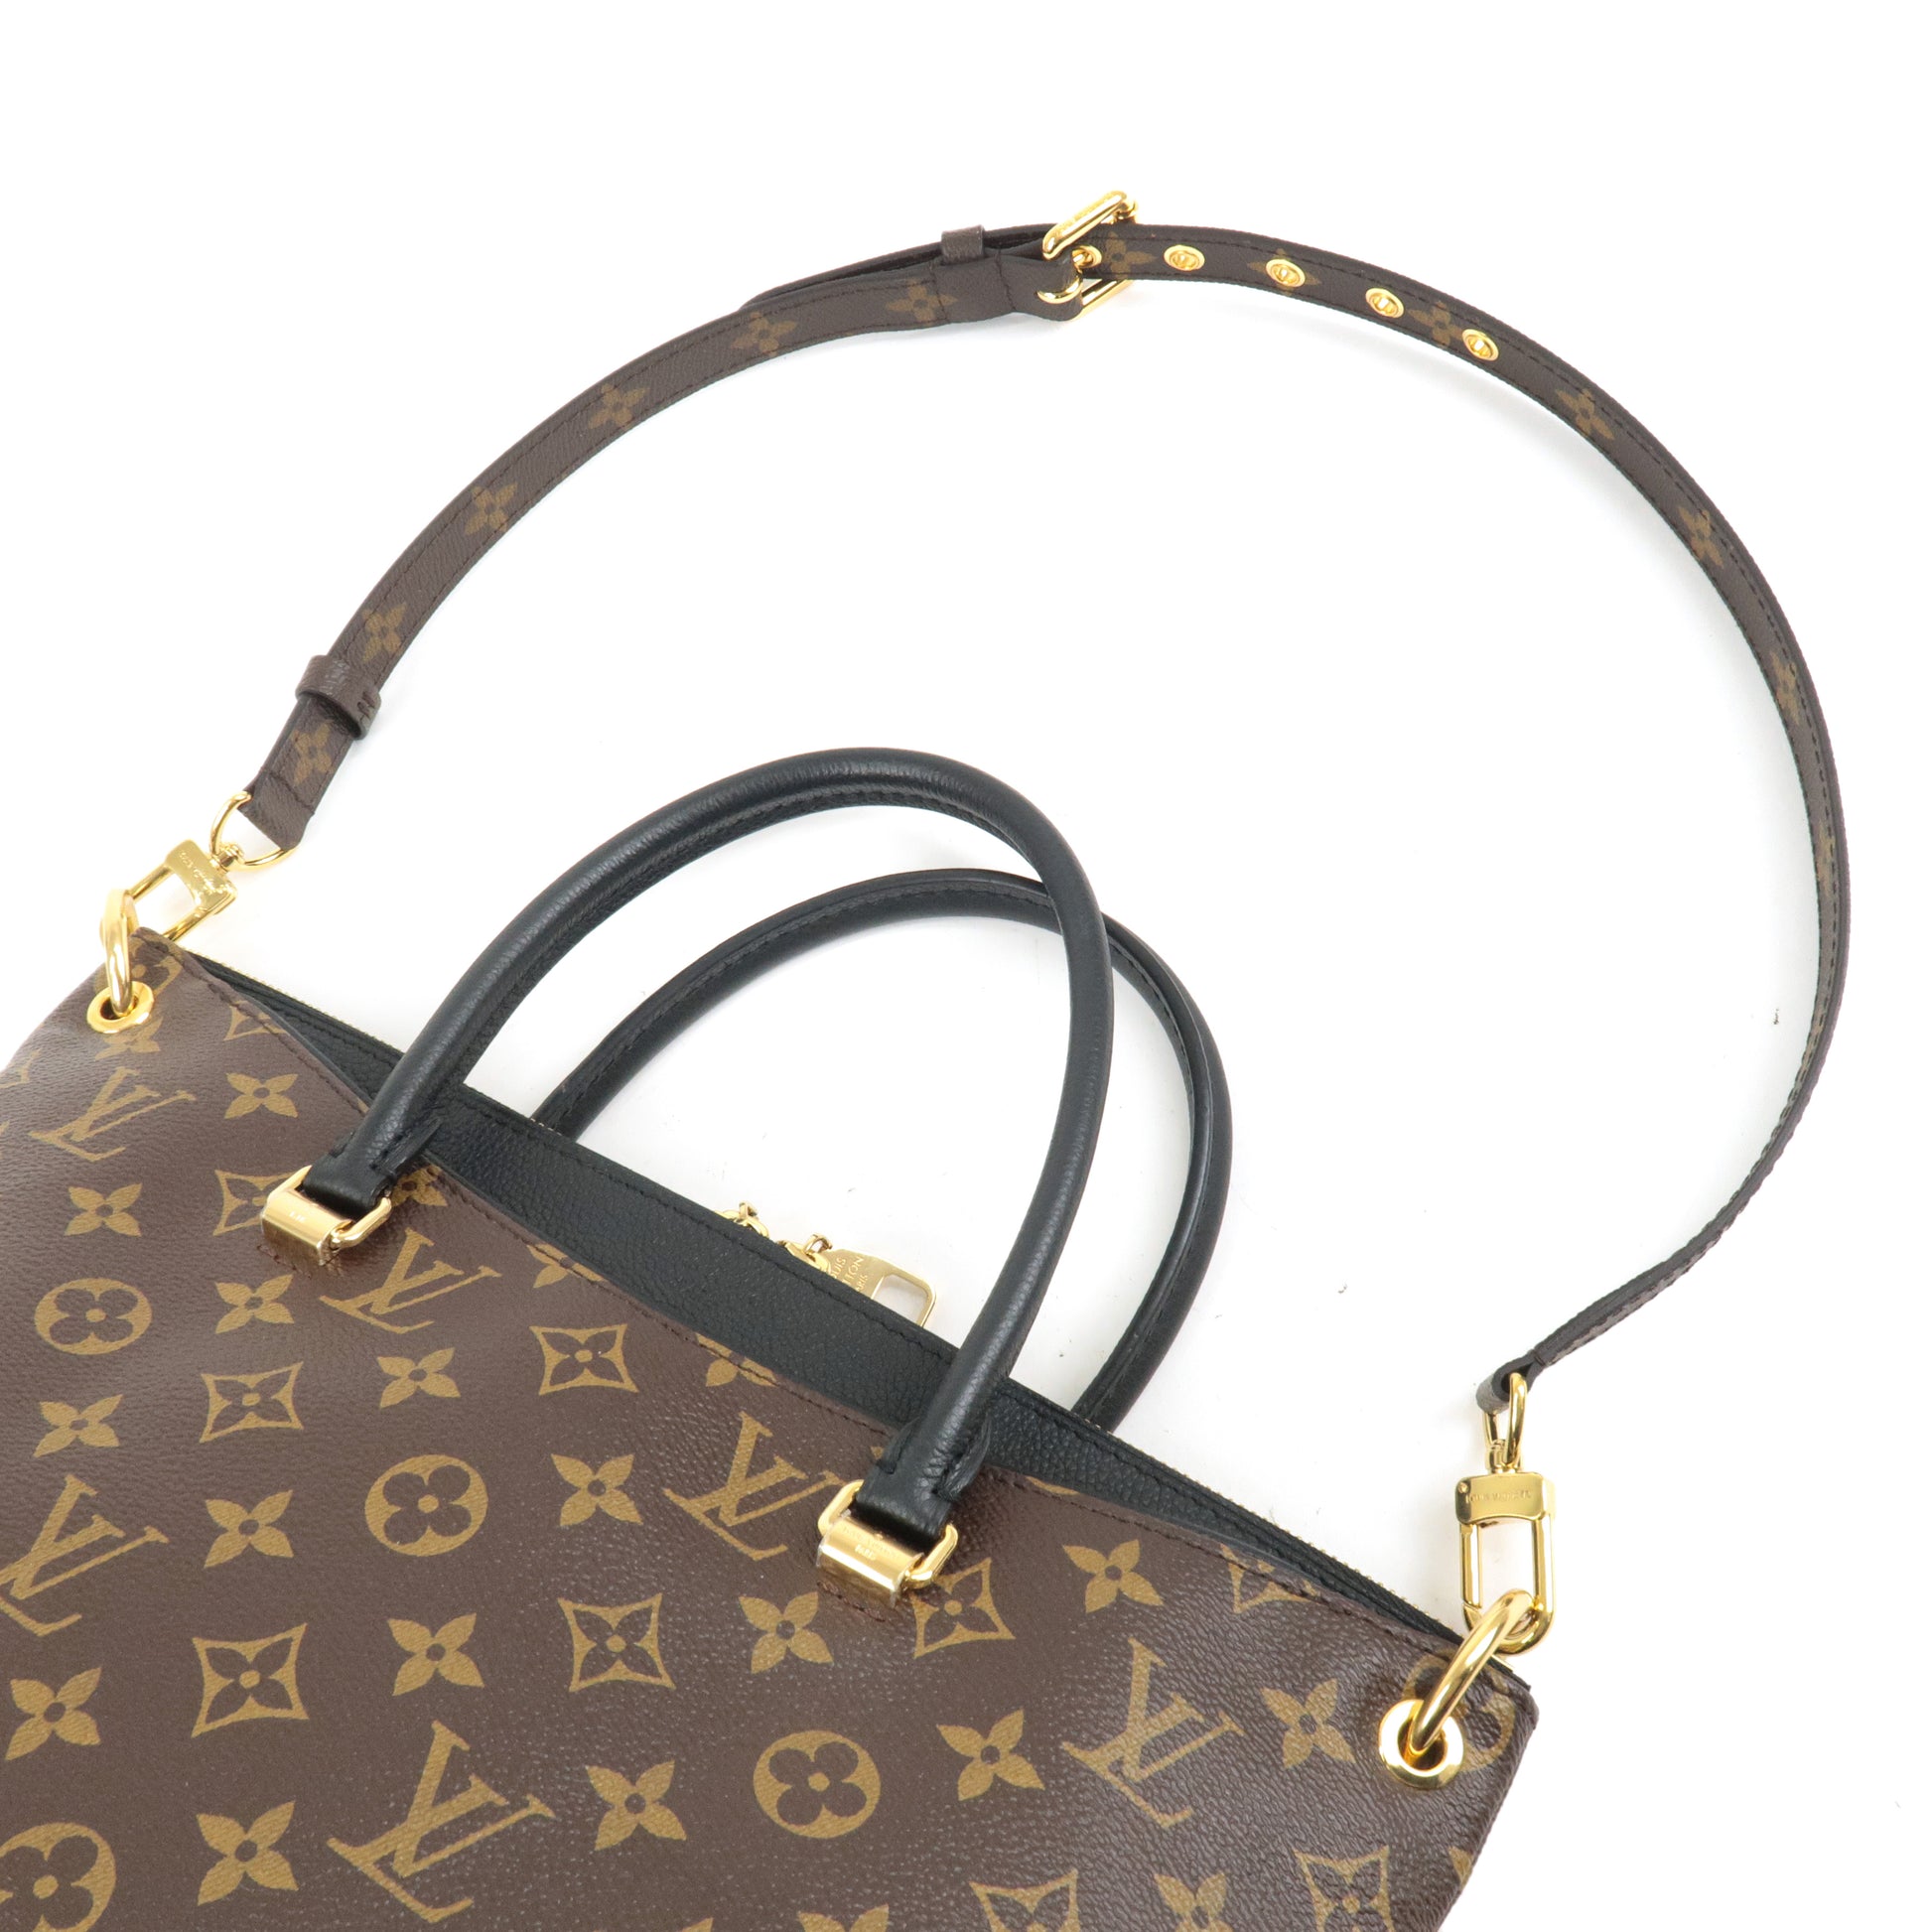 Louis Vuitton 2007 pre-owned Limited Edition Speedy 30 Denim Bag